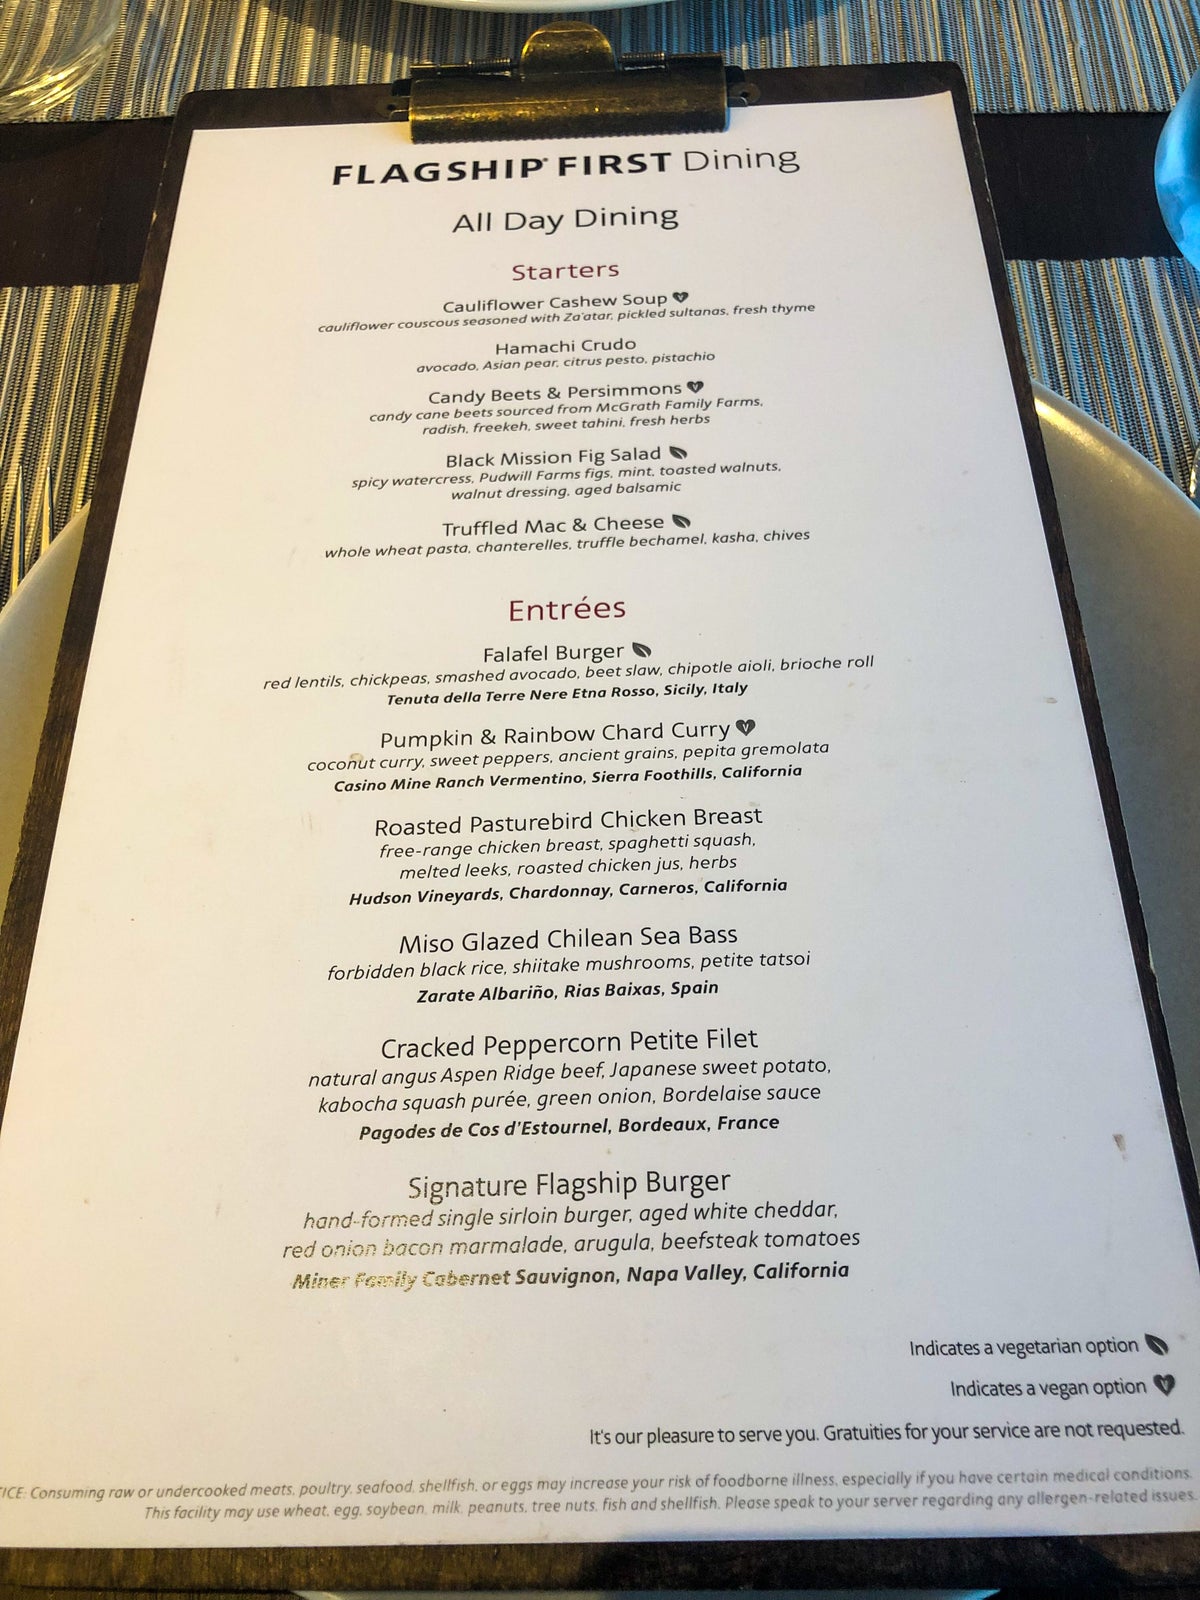 American Airlines Flagship First Dining LAX dining menu